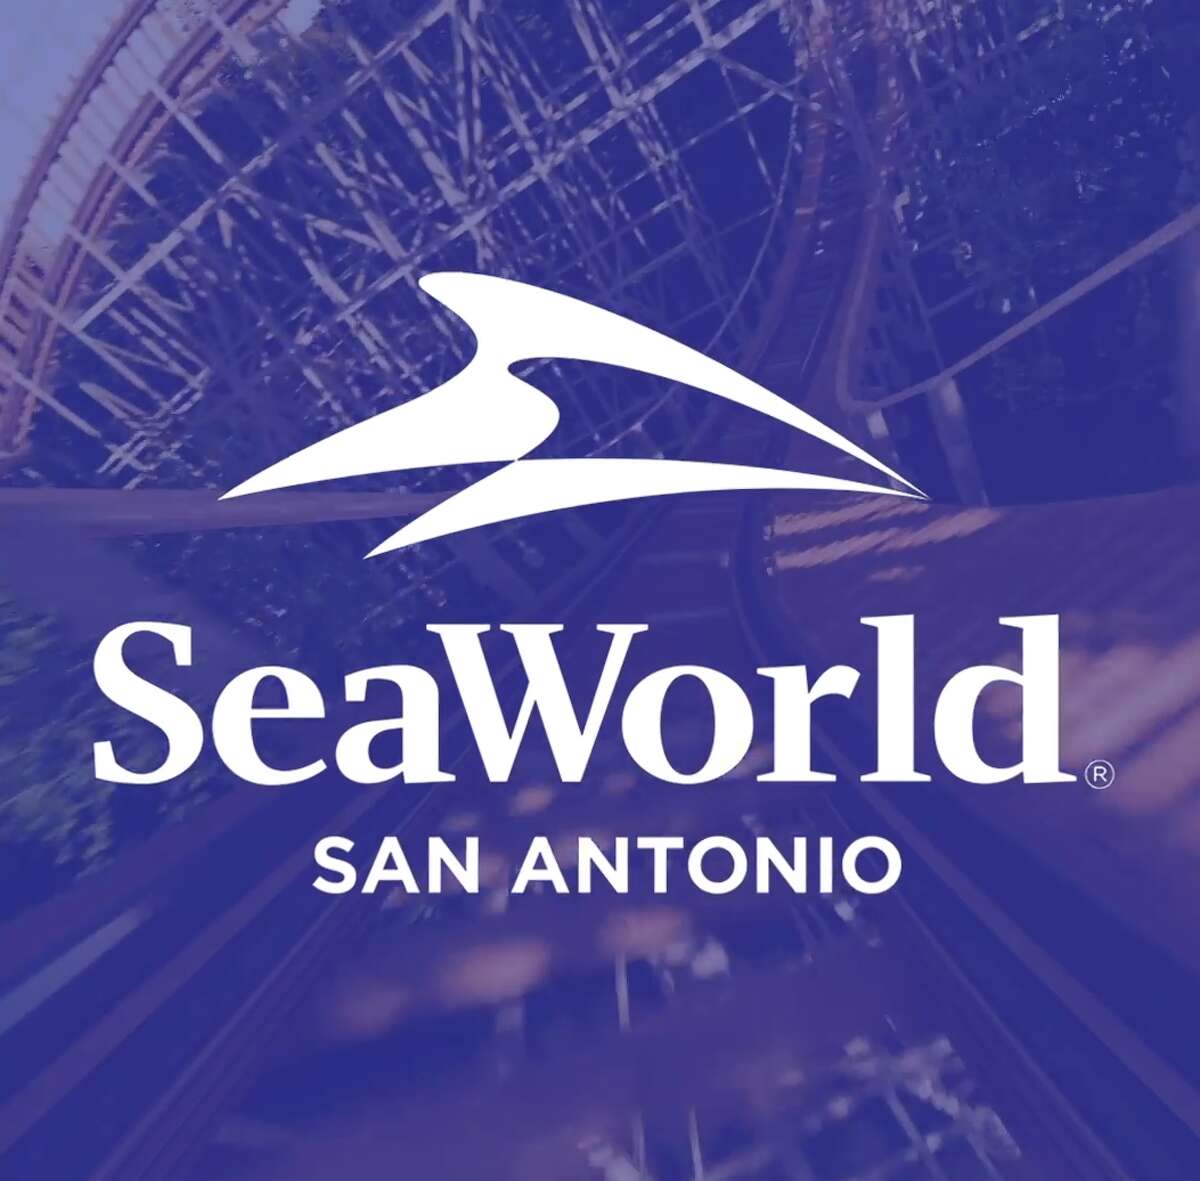 In an effort to help with the coronavirus pandemic, SeaWorld San Antonio donated hundreds of face masks to the University Health System.